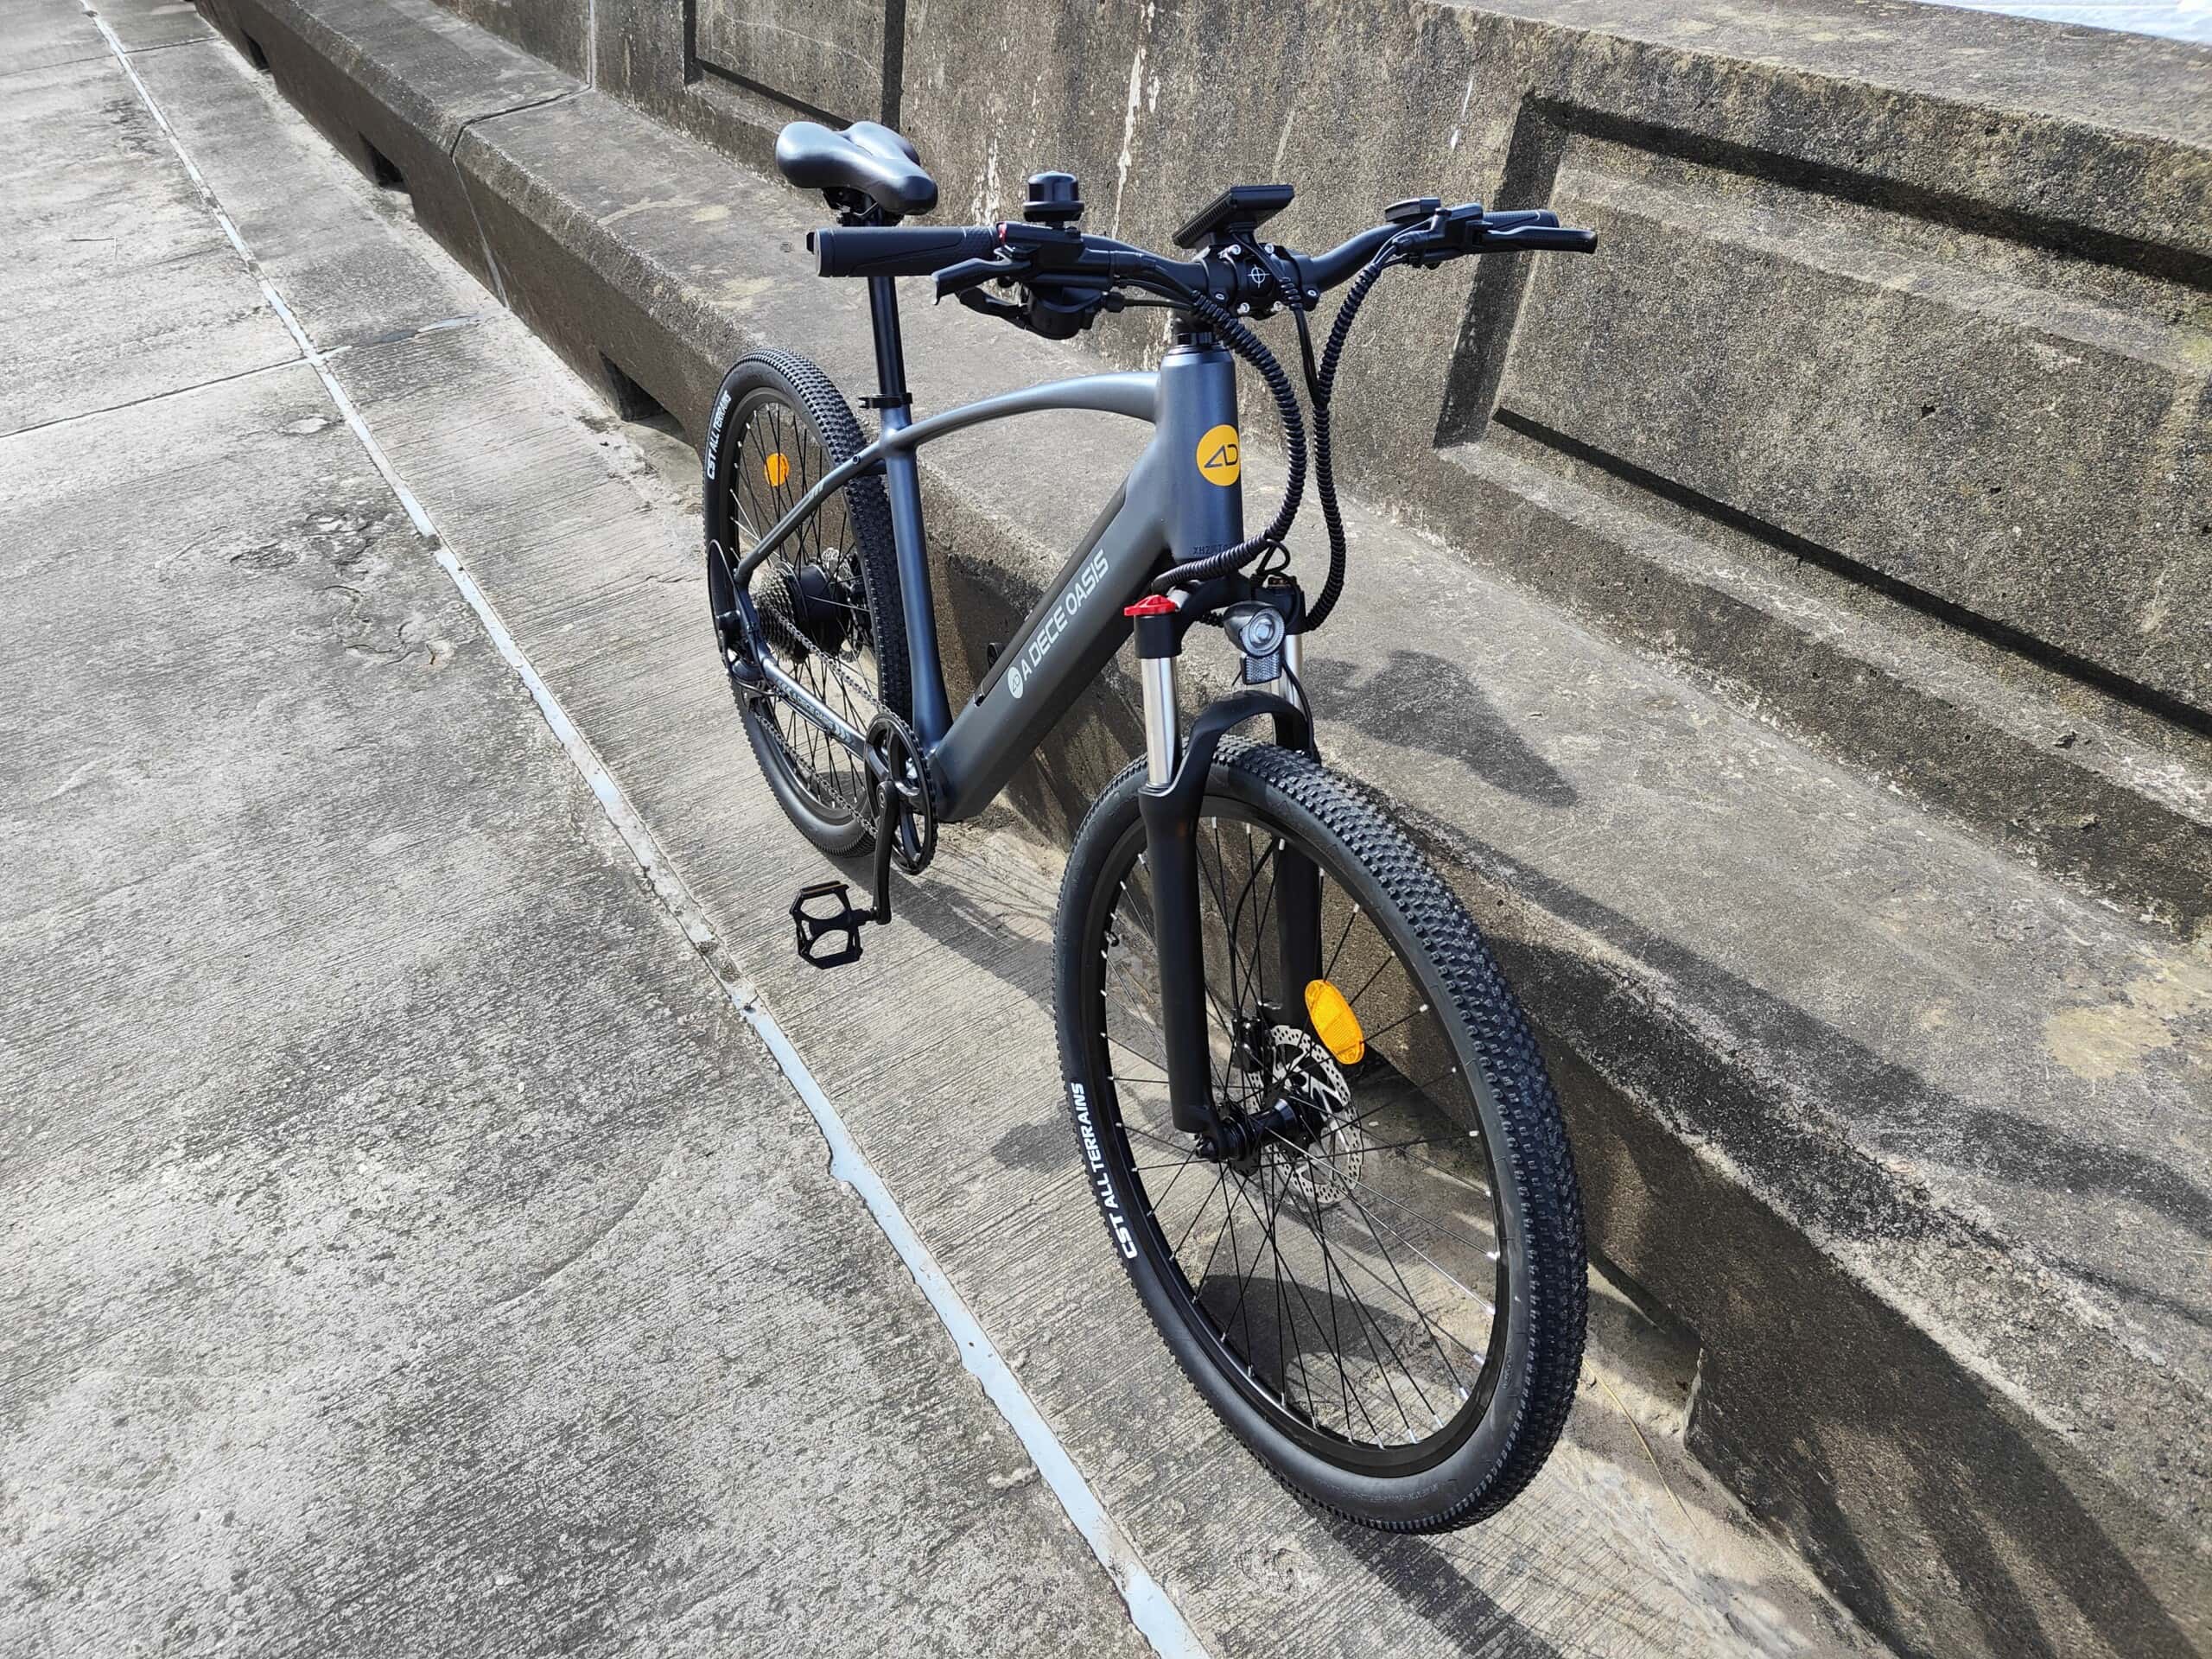 ADO D30C E Bike Review 5 scaled - ADO D30C E-Bike Review – An excellent mixed-use electric bike ideal for long commutes